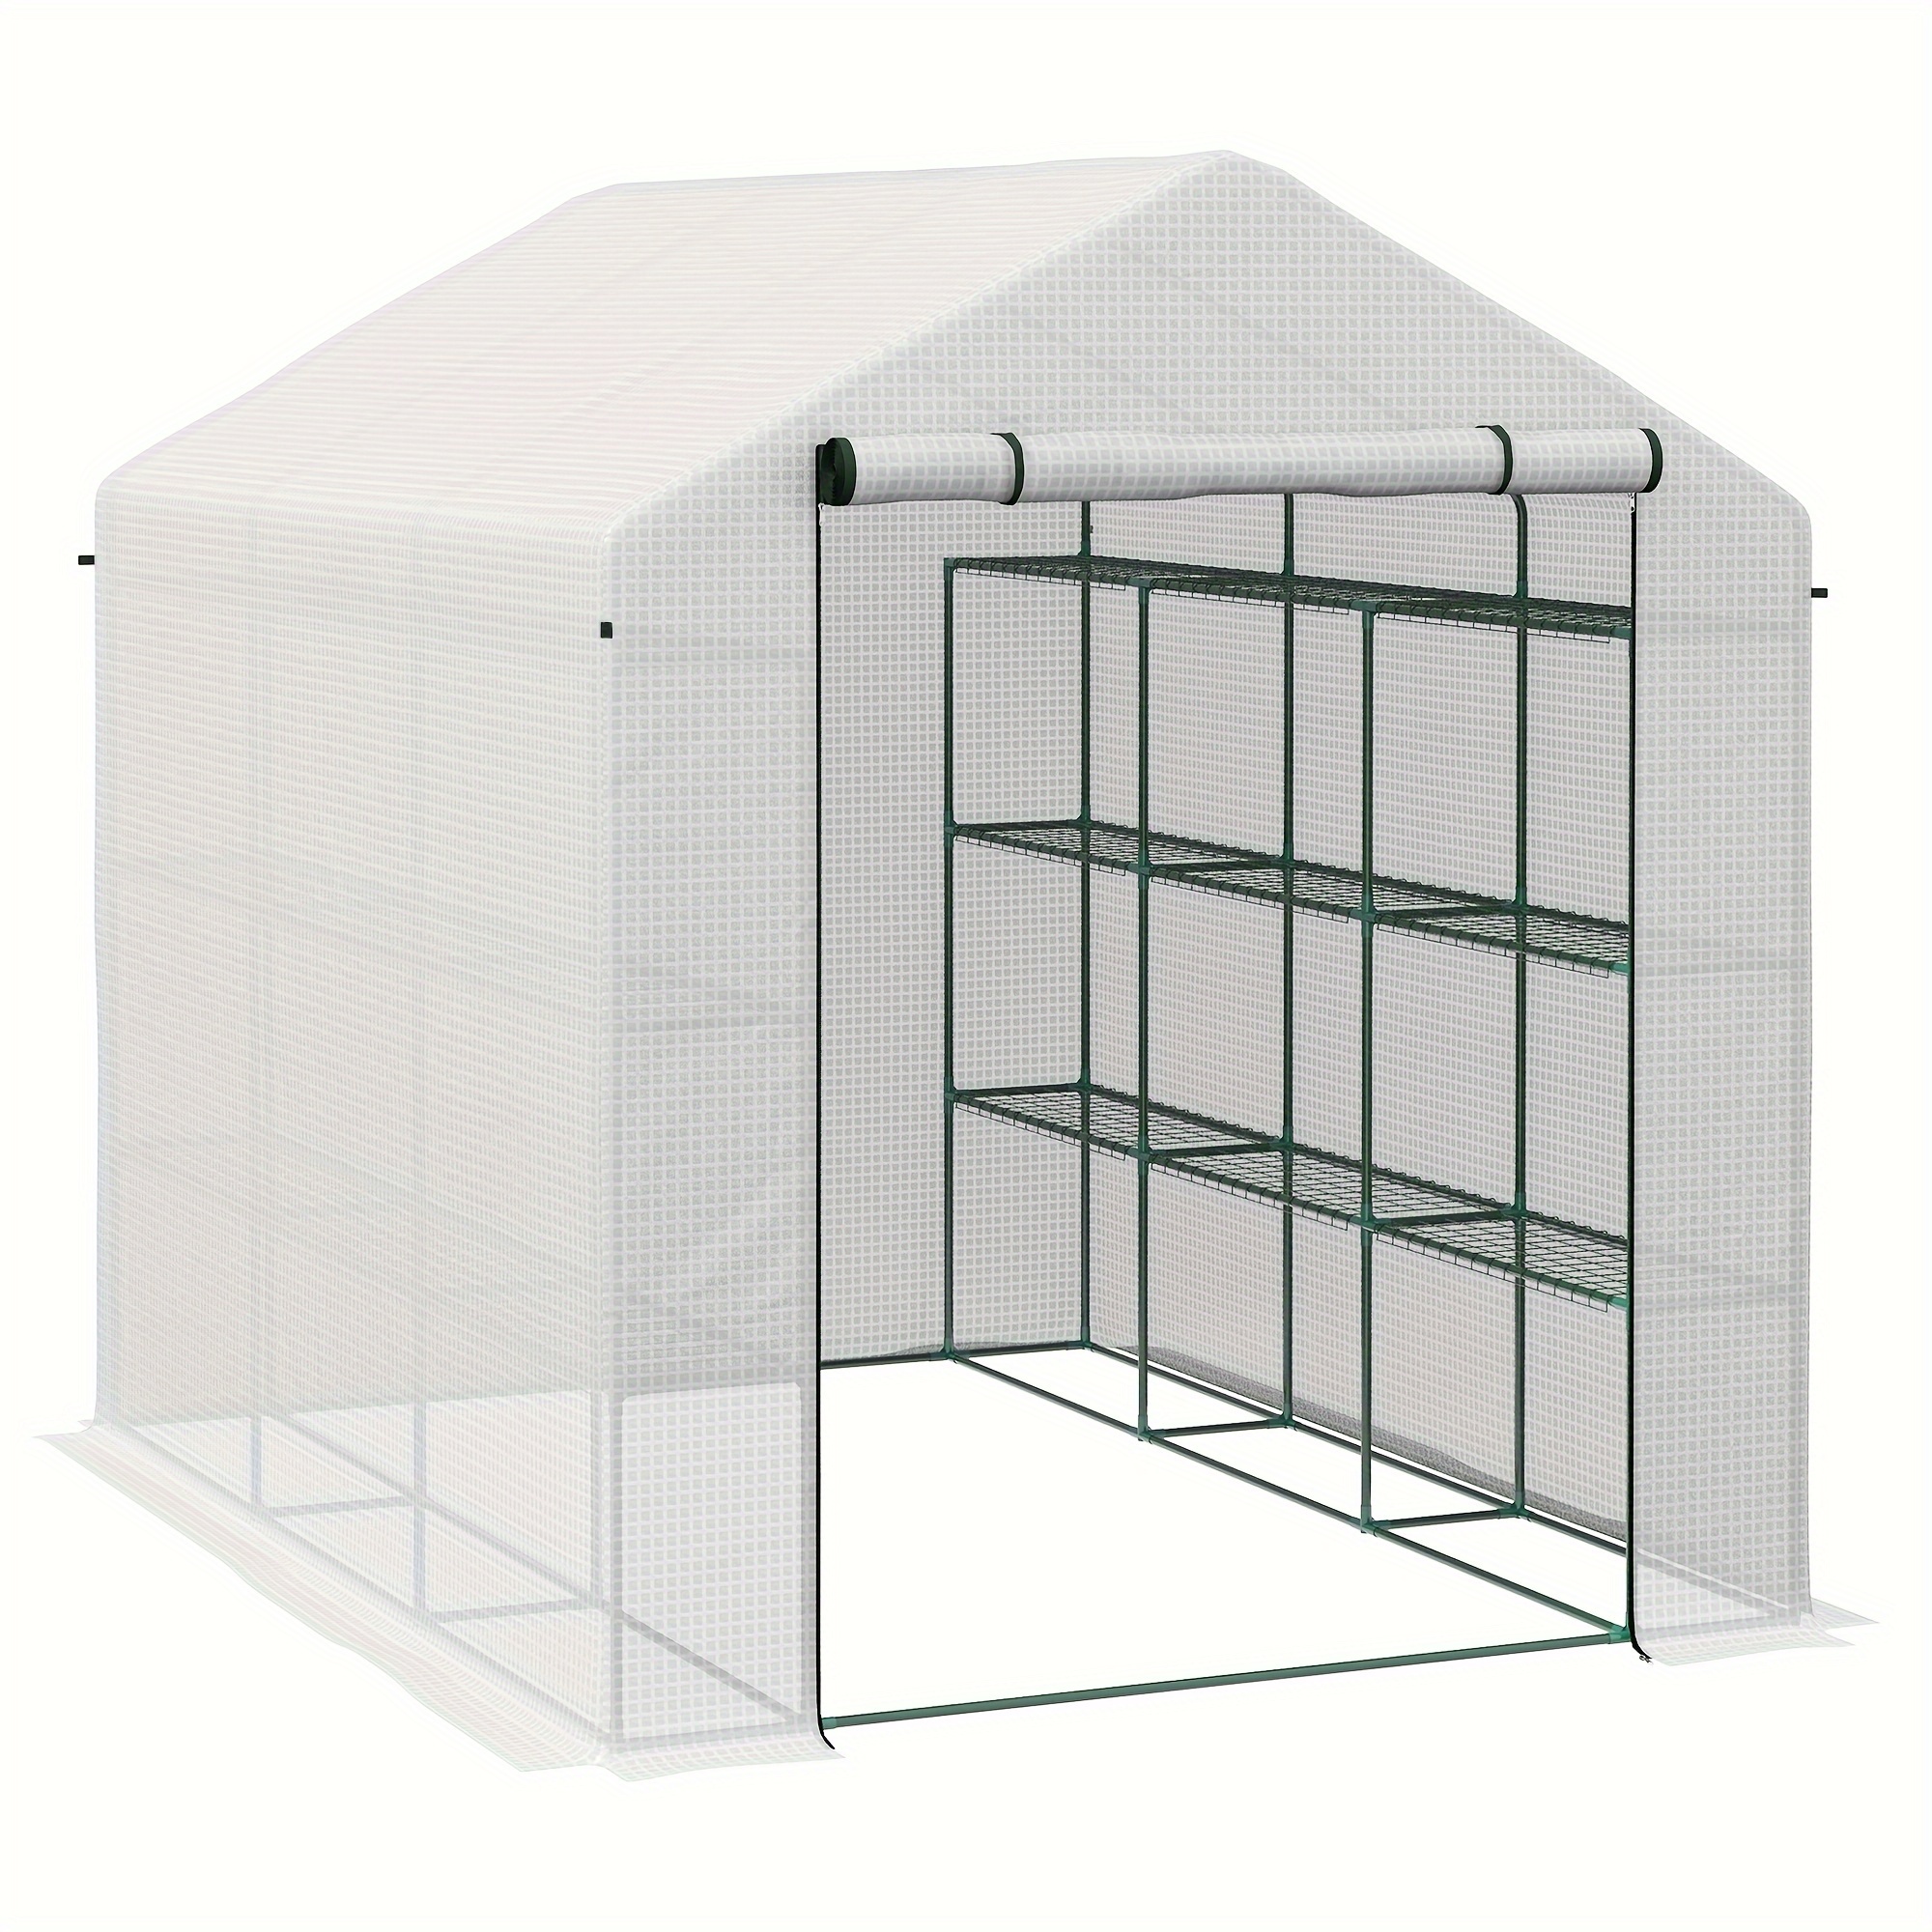 

Outsunny 8' X 6' X 7' Walk-in Greenhouse, Pe Cover, 4-tier Shelves, Steel Frame Hot House, Roll-up Zipper Door For Flowers, Vegetables, Saplings, Tropical Plants, White